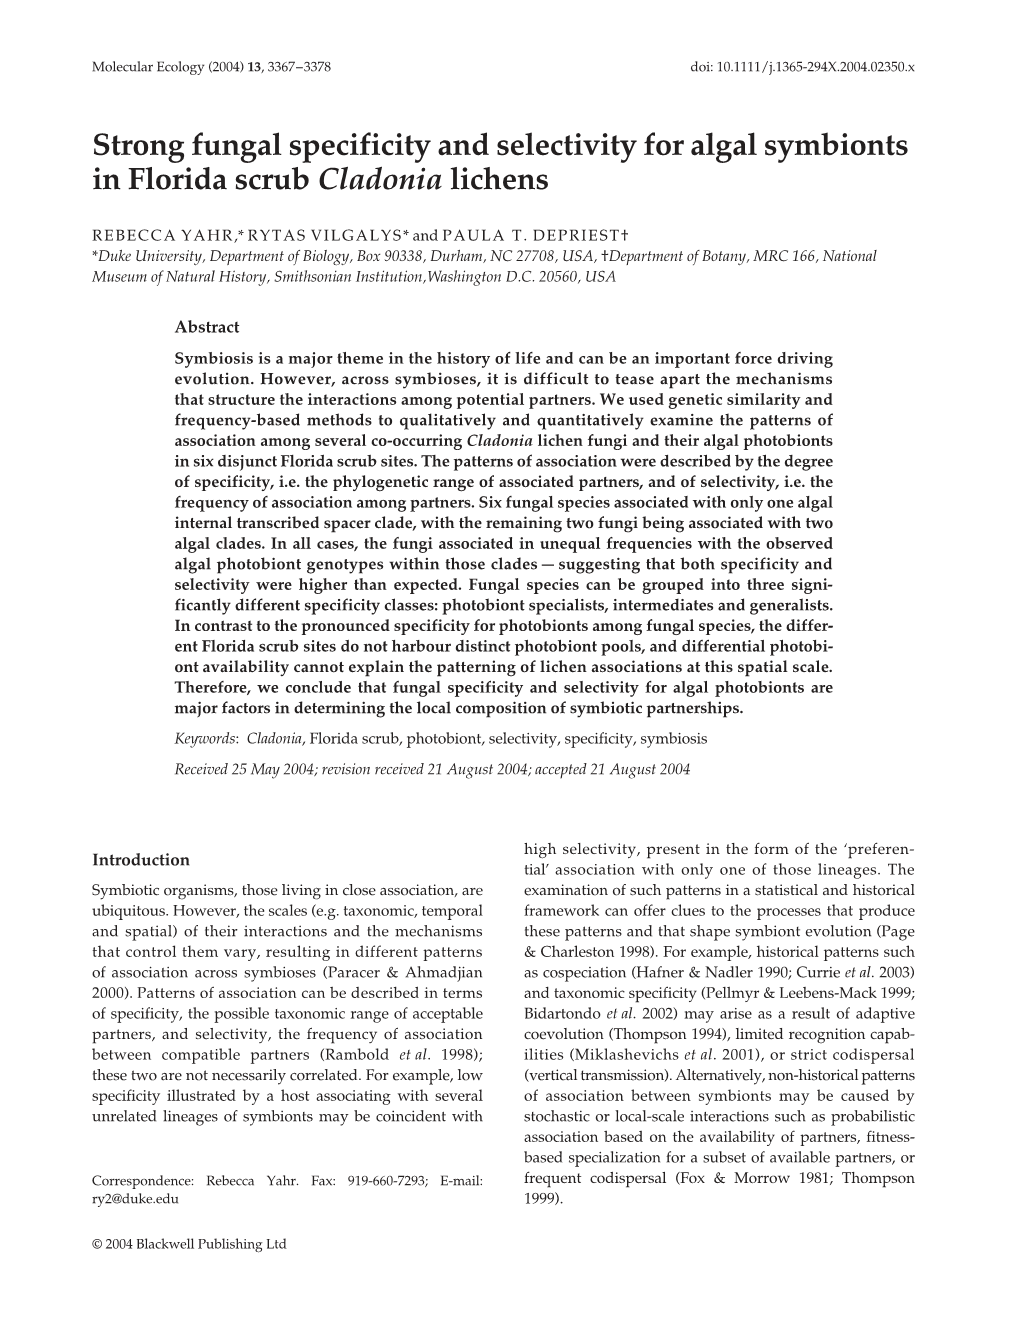 Strong Fungal Specificity and Selectivity for Algal Symbionts in Florida Scrub